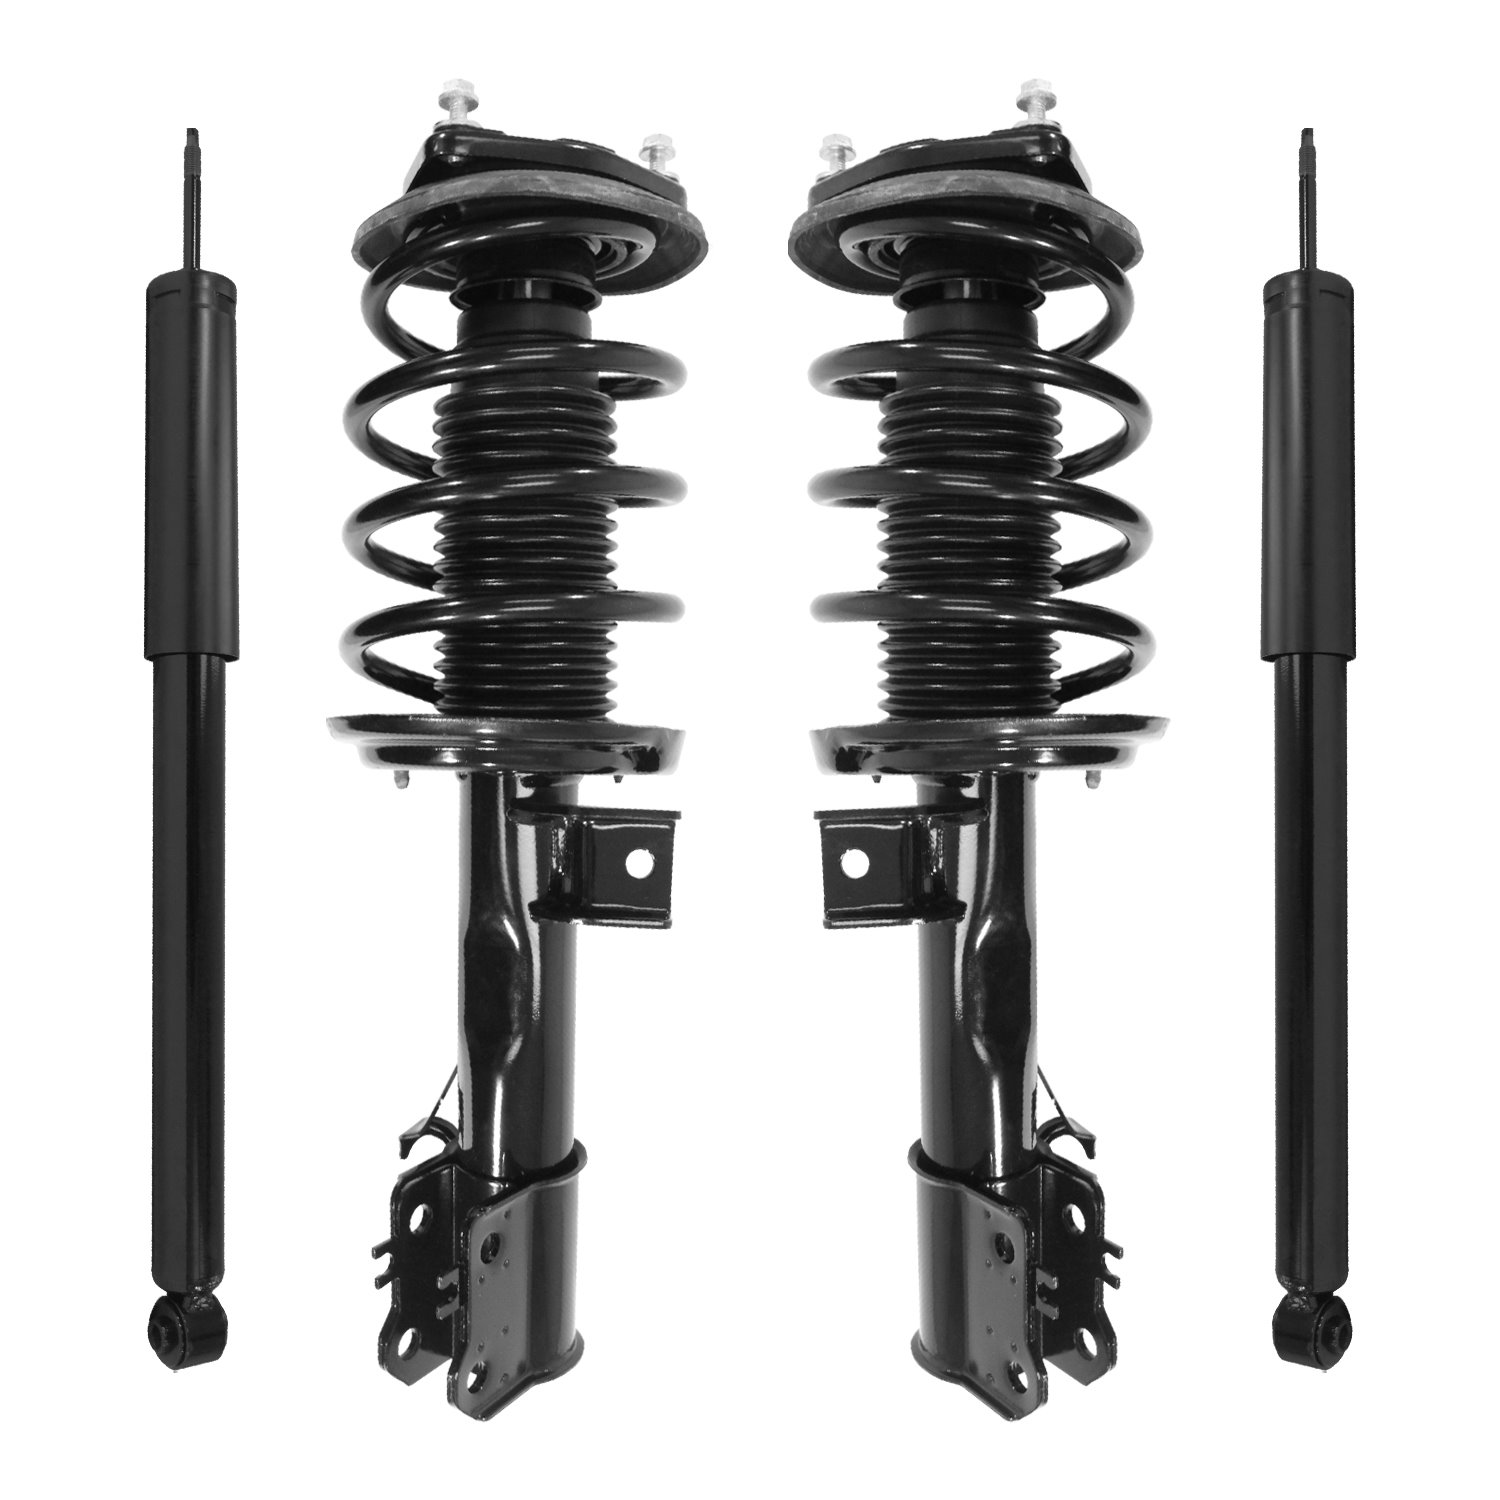 4-11765-257090-001 Front & Rear Suspension Strut & Coil Spring Assembly Fits Select Mercedes-Benz